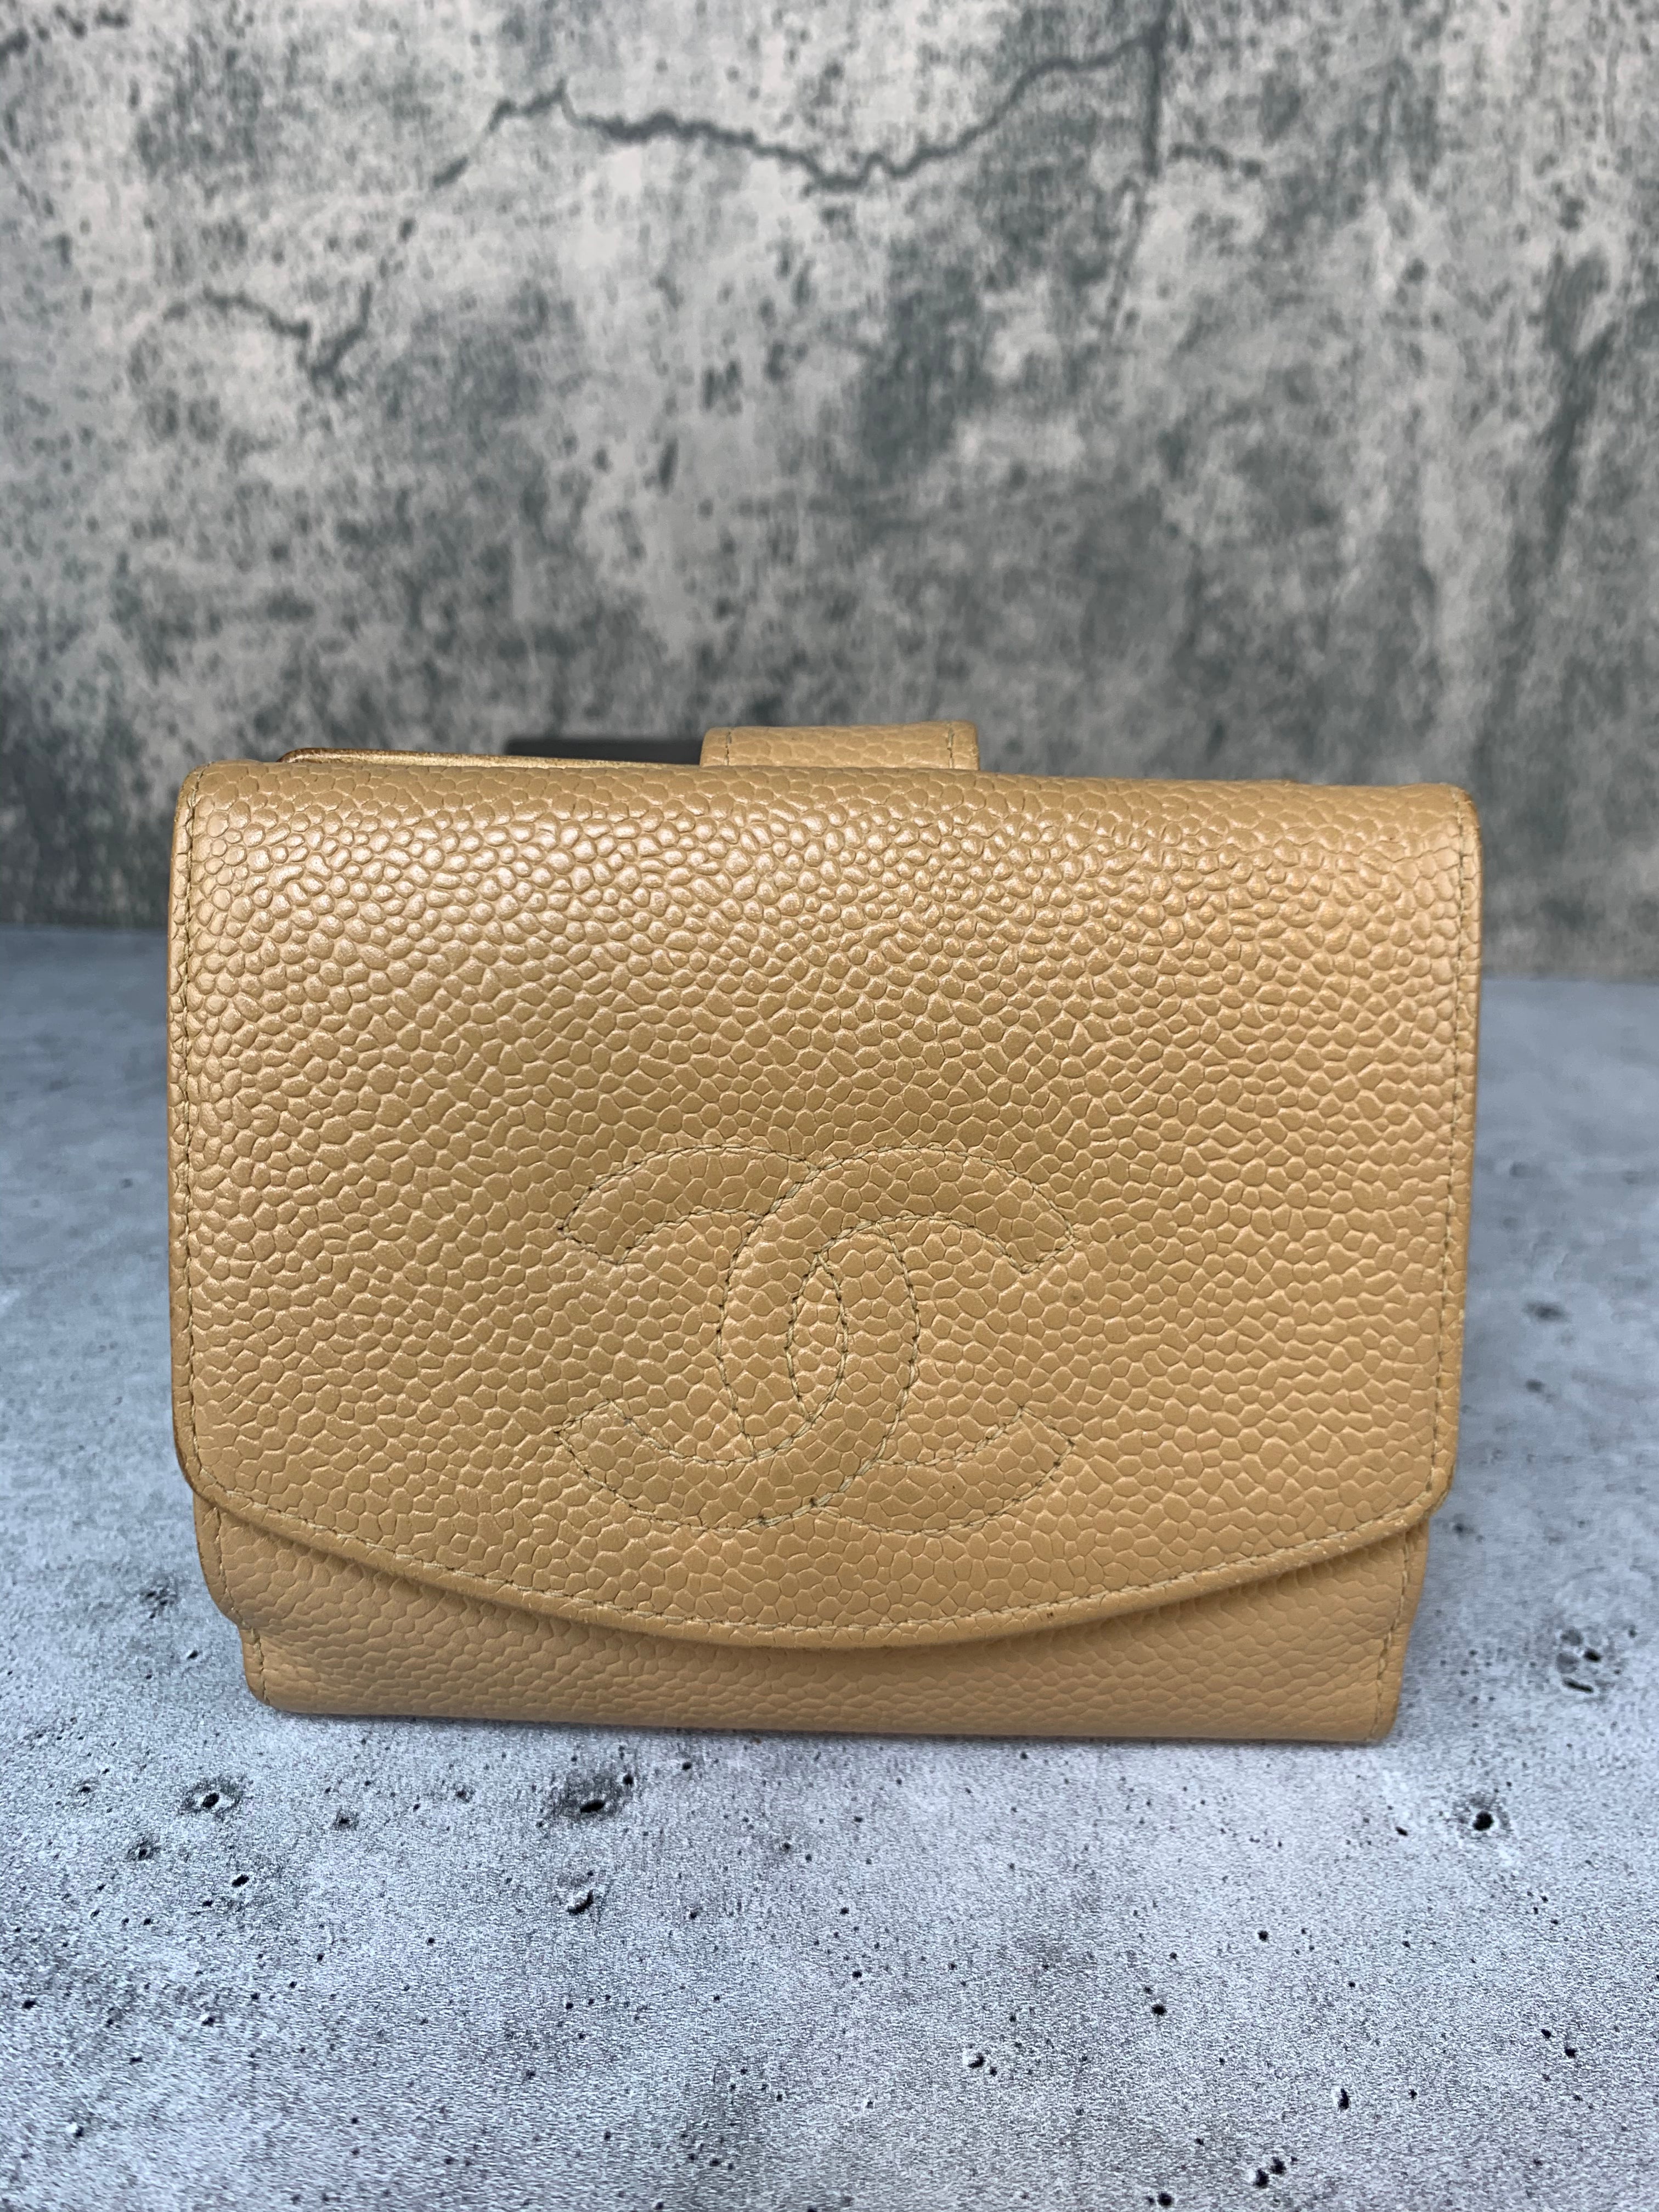 Chanel Tan Brown Beige Pebbled Leather Trifold Wallet w Coin Purse